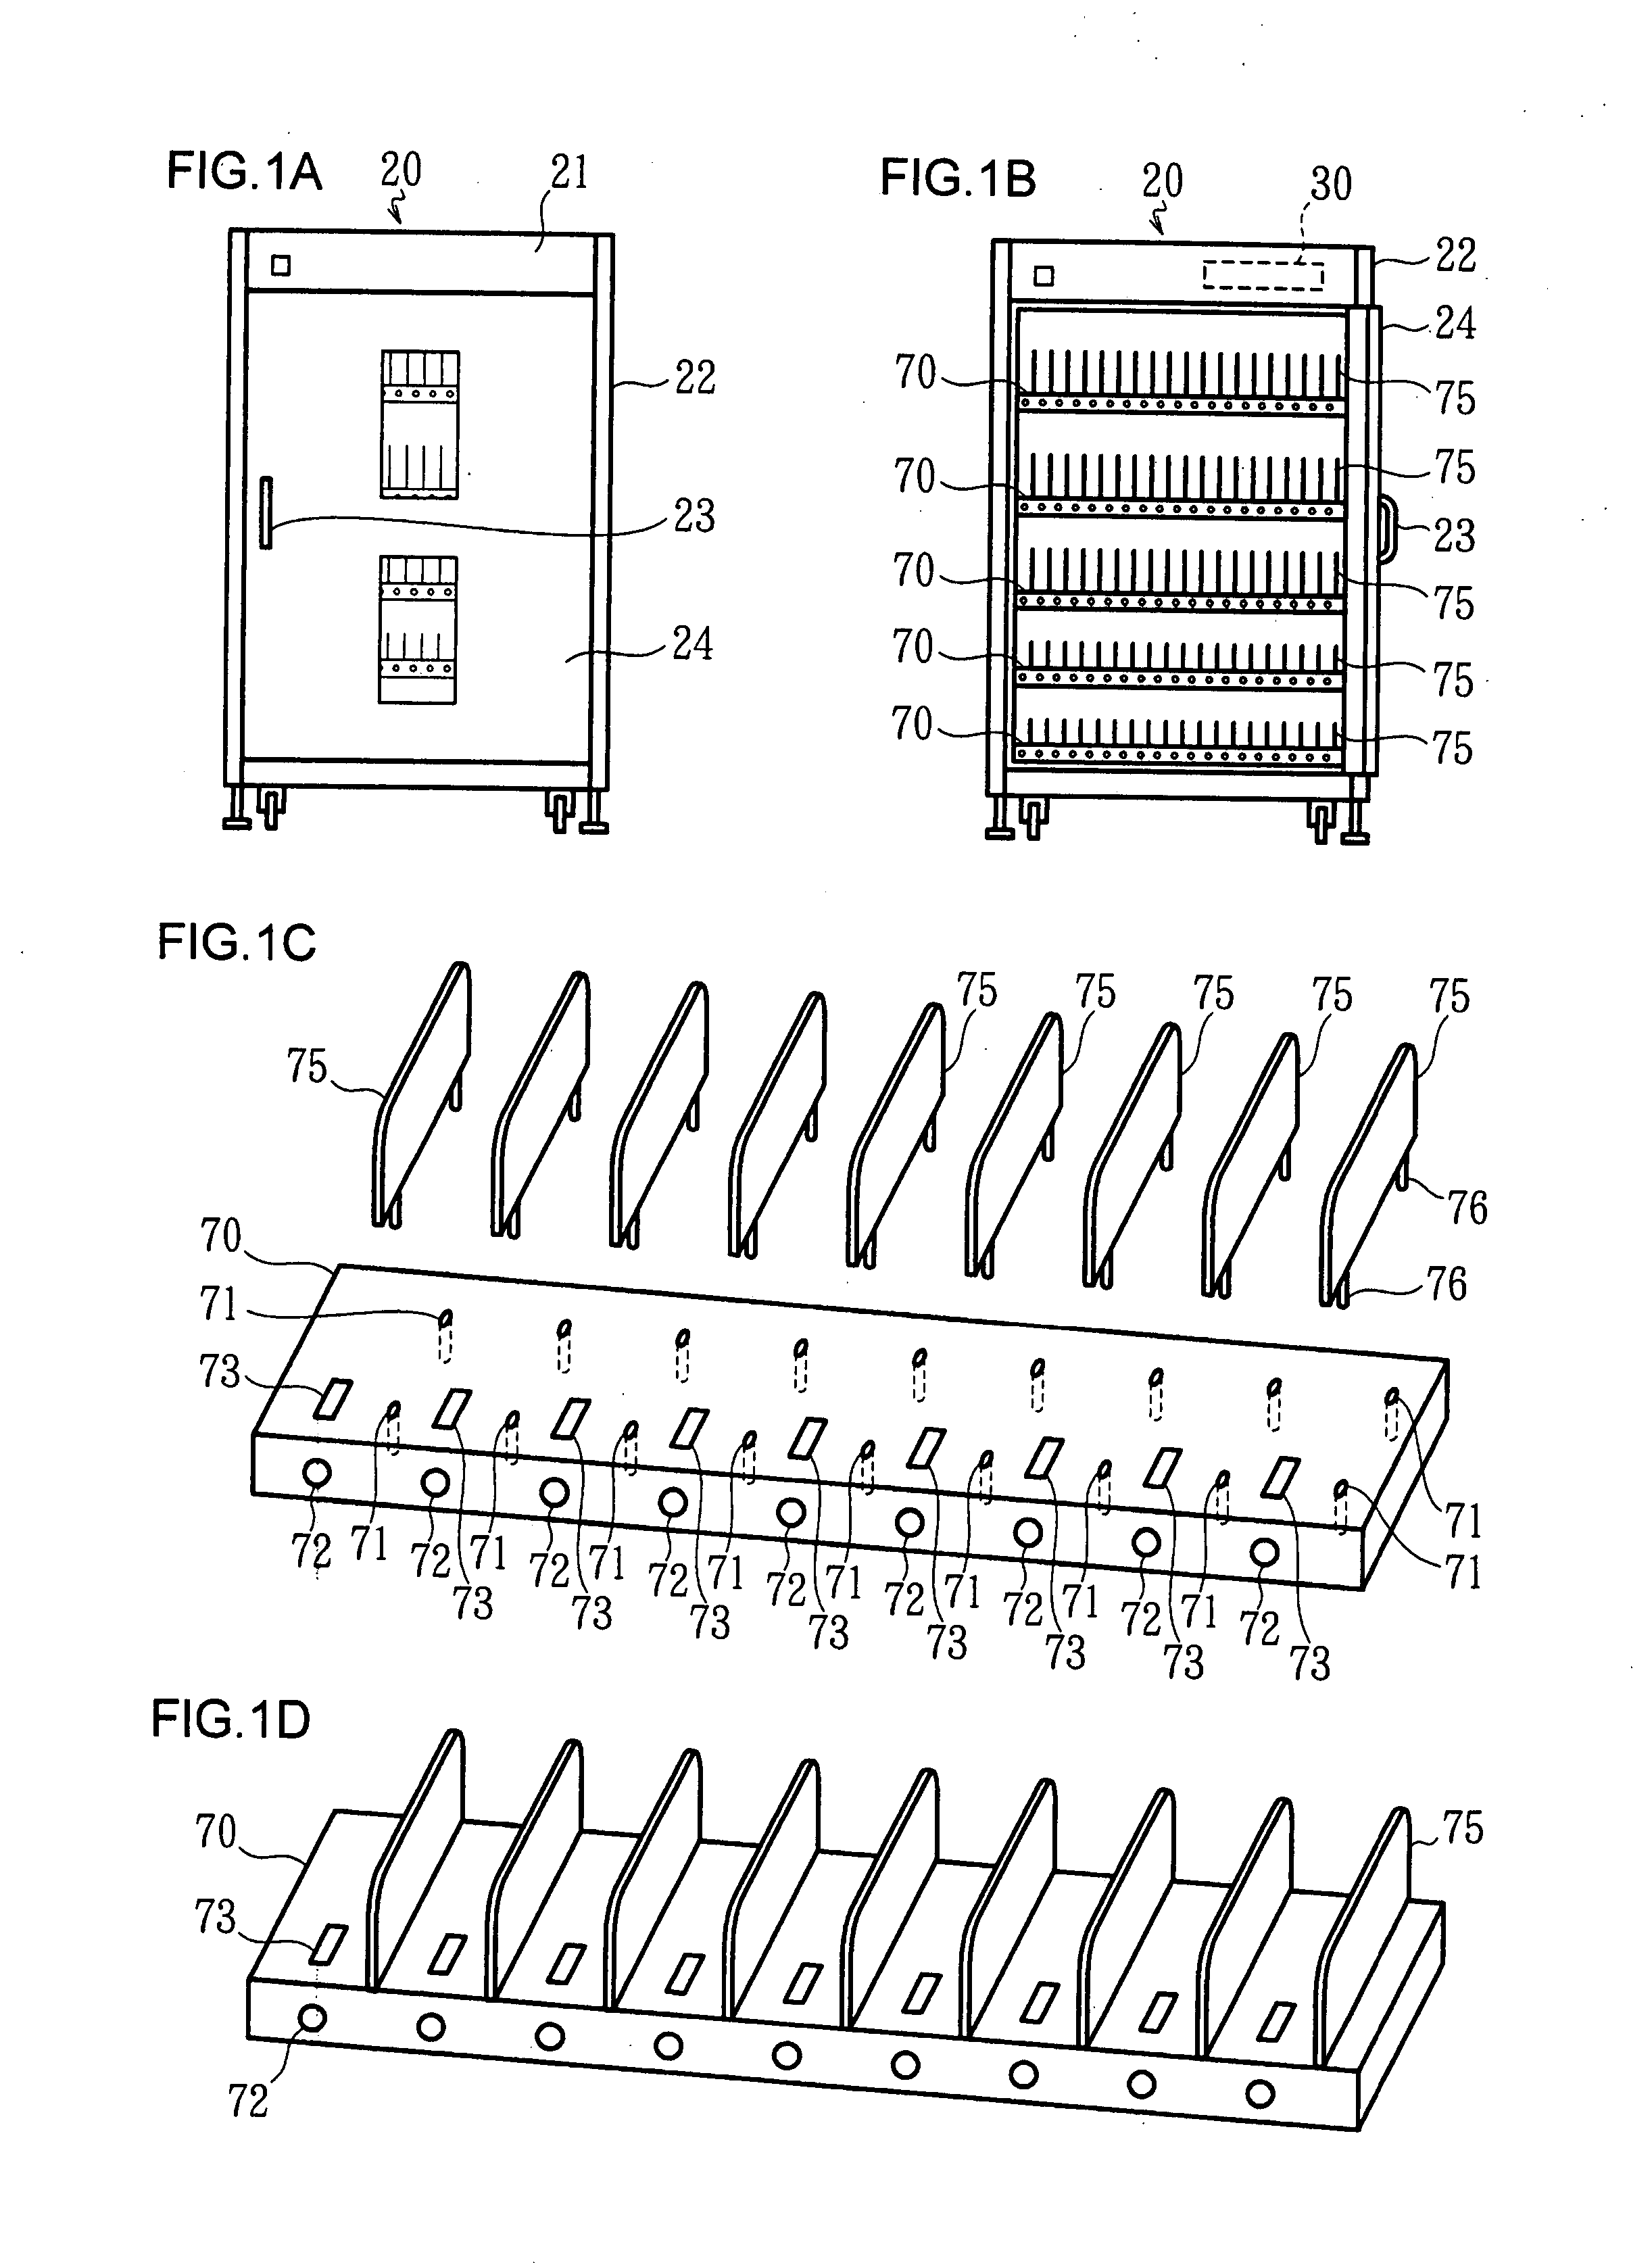 Medical Resource Storage and Management Apparatus and Medical Supply Management System